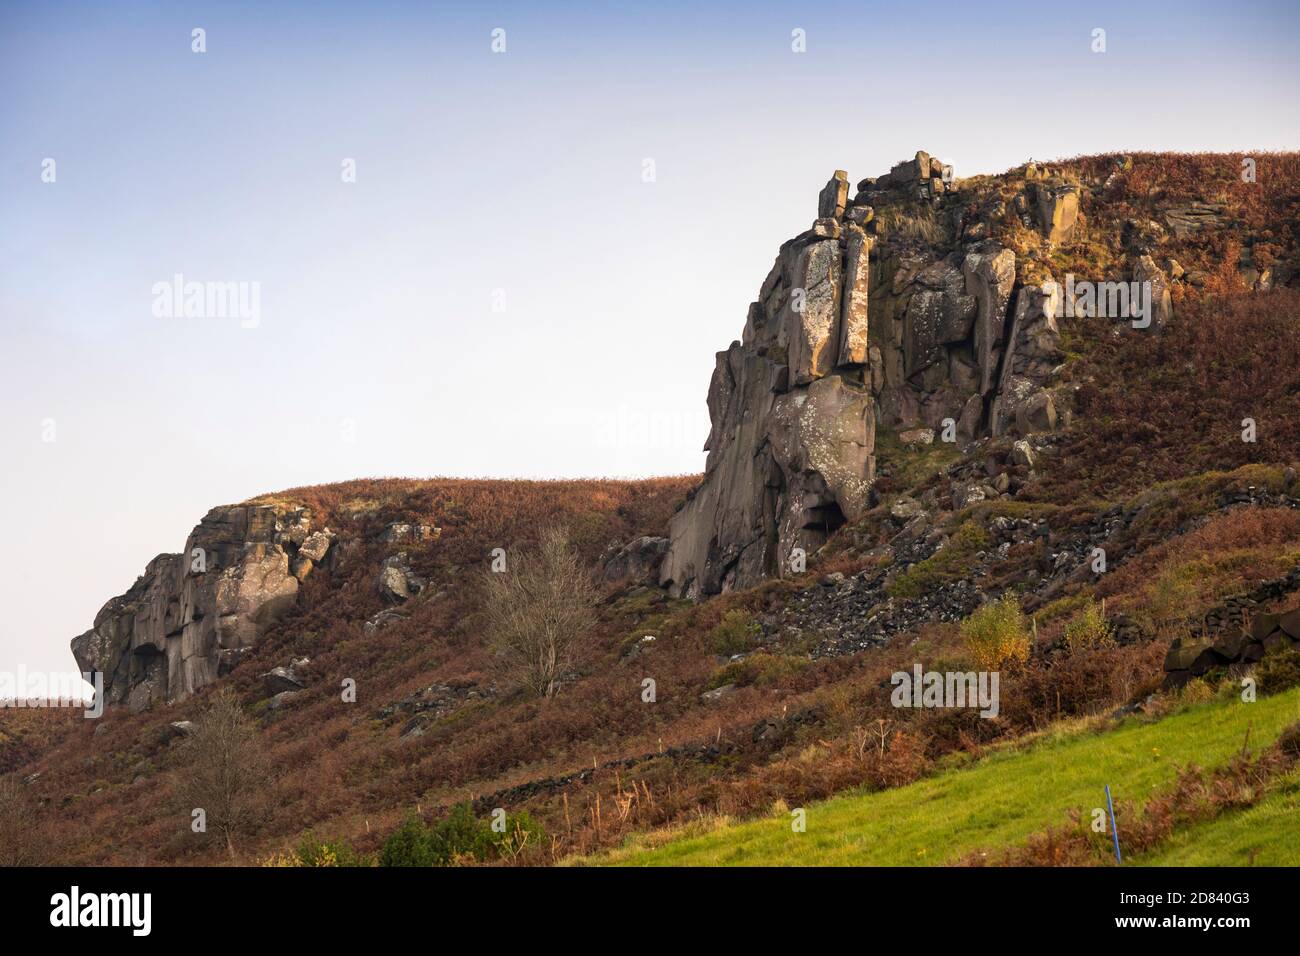 UK, England, Staffordshire, Moorlands, The Roaches, rocky outcrop at Five Clouds Stock Photo